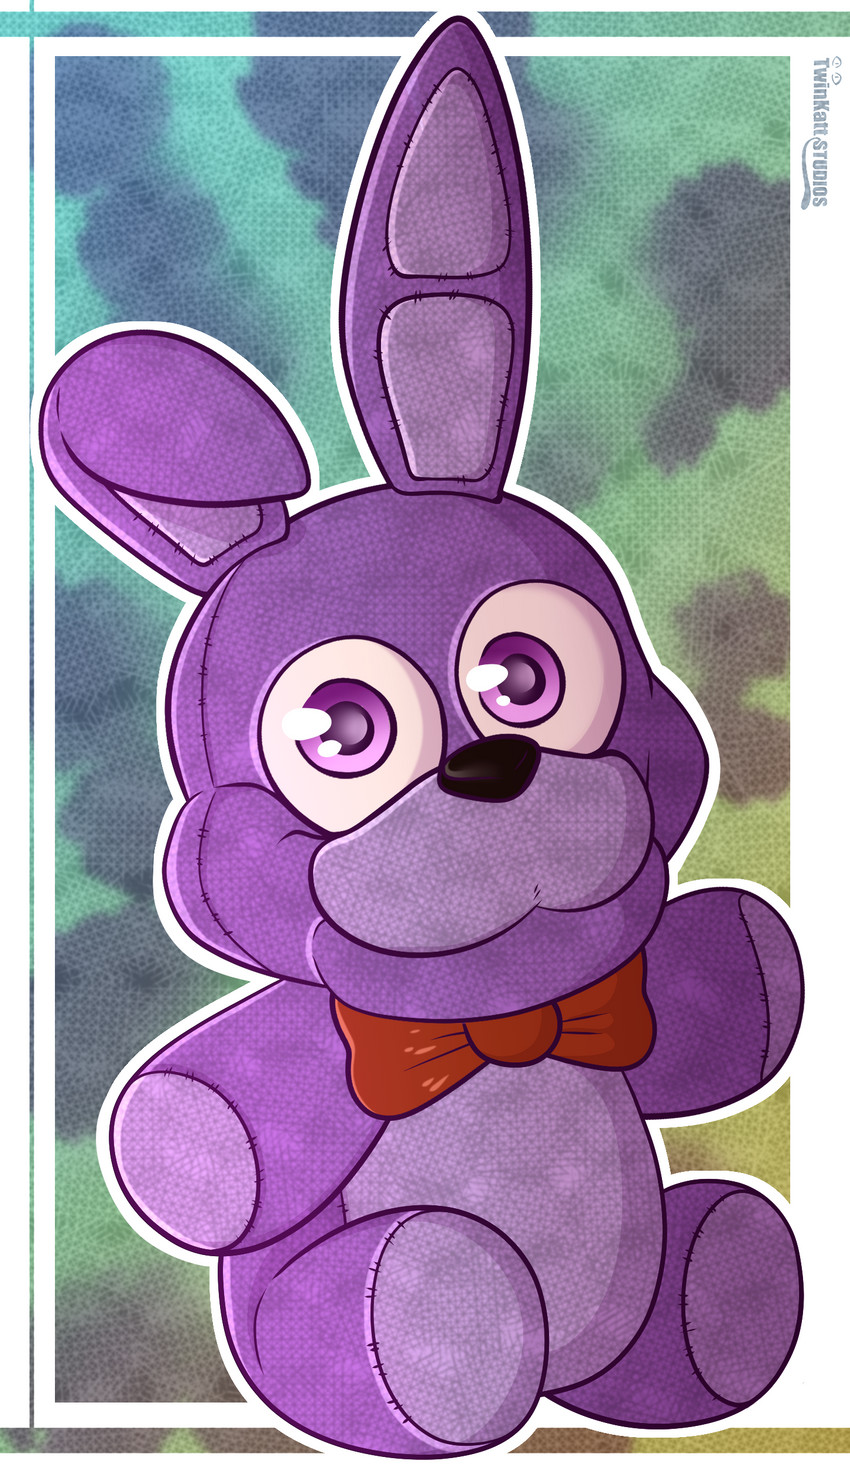 bonnie and plush bonnie (five nights at freddy's and etc) created by twinkattstudios